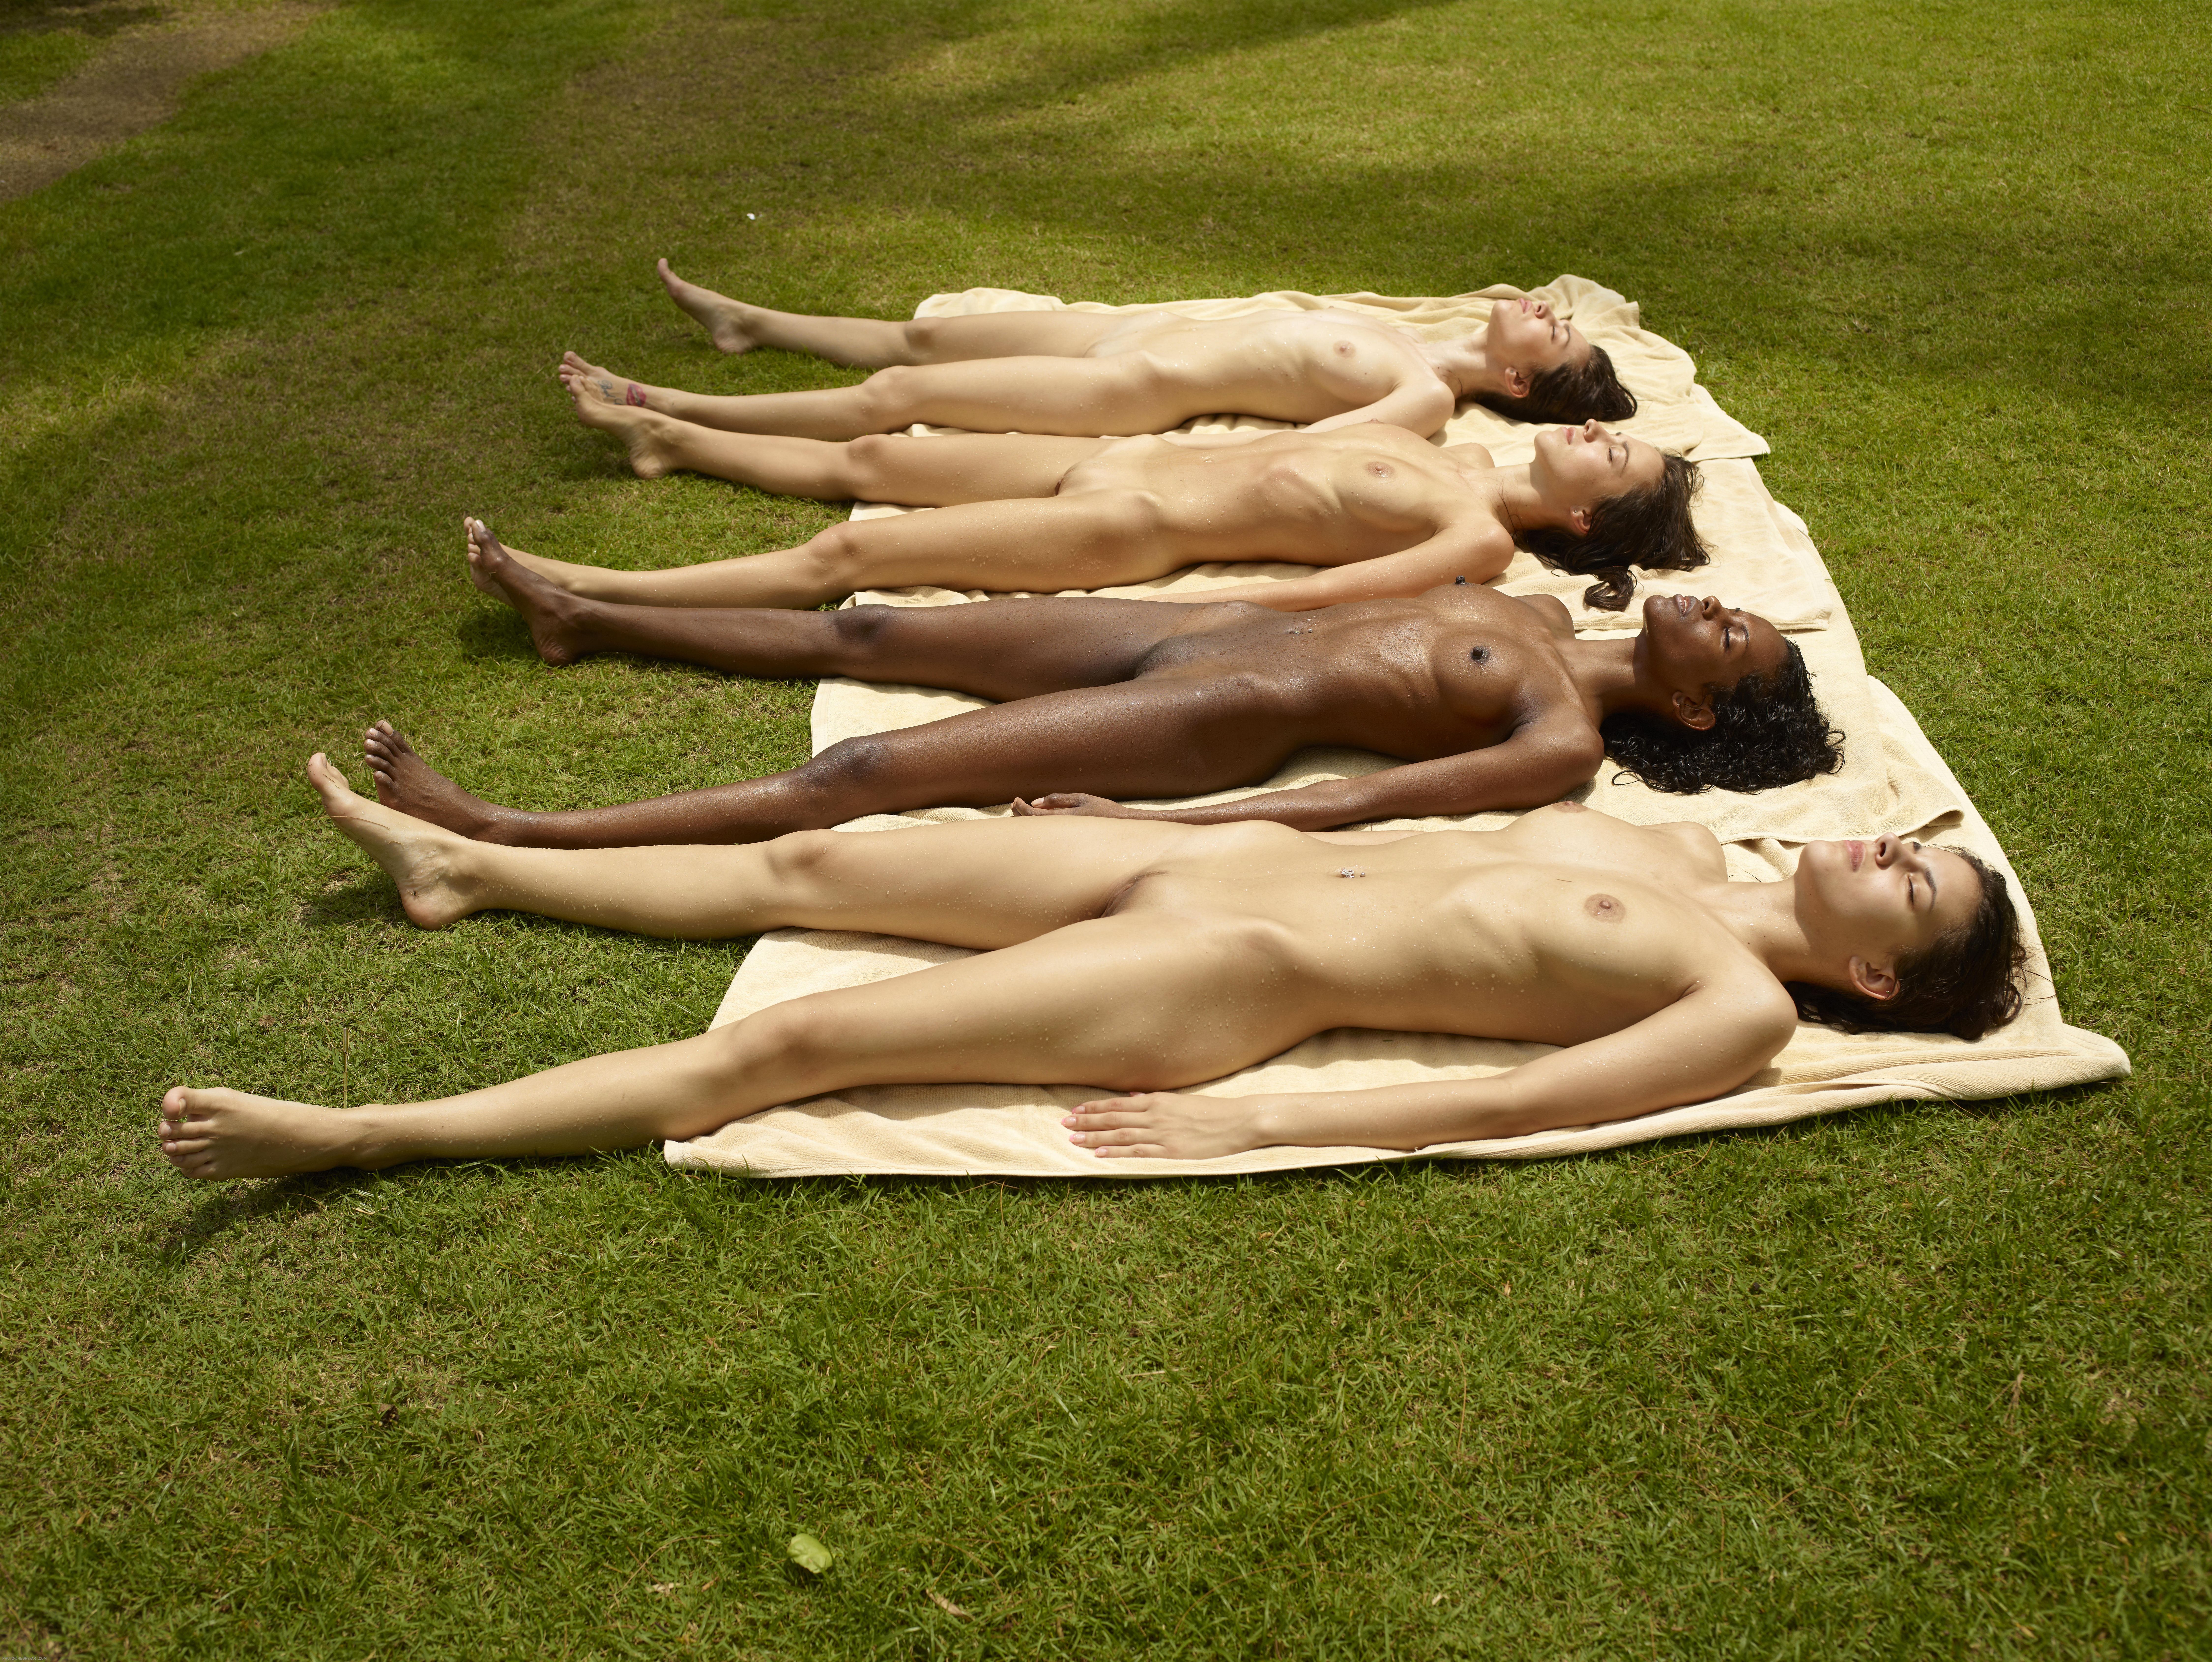 Interracial group nude sunbathing pictures